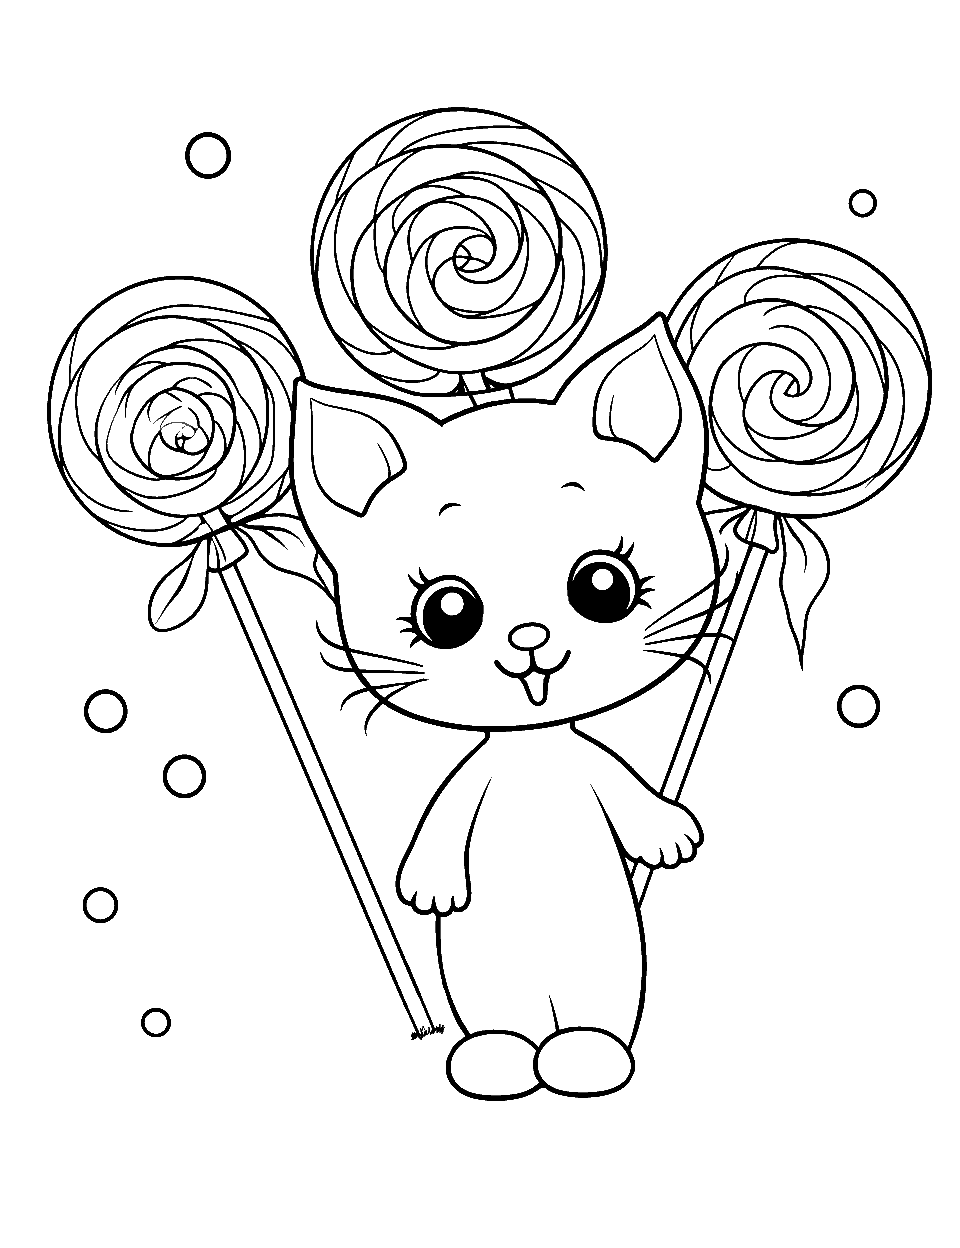 Cute Kitten With Lollipops Candy Coloring Page - A playful kitten surrounded by colorful lollipops.